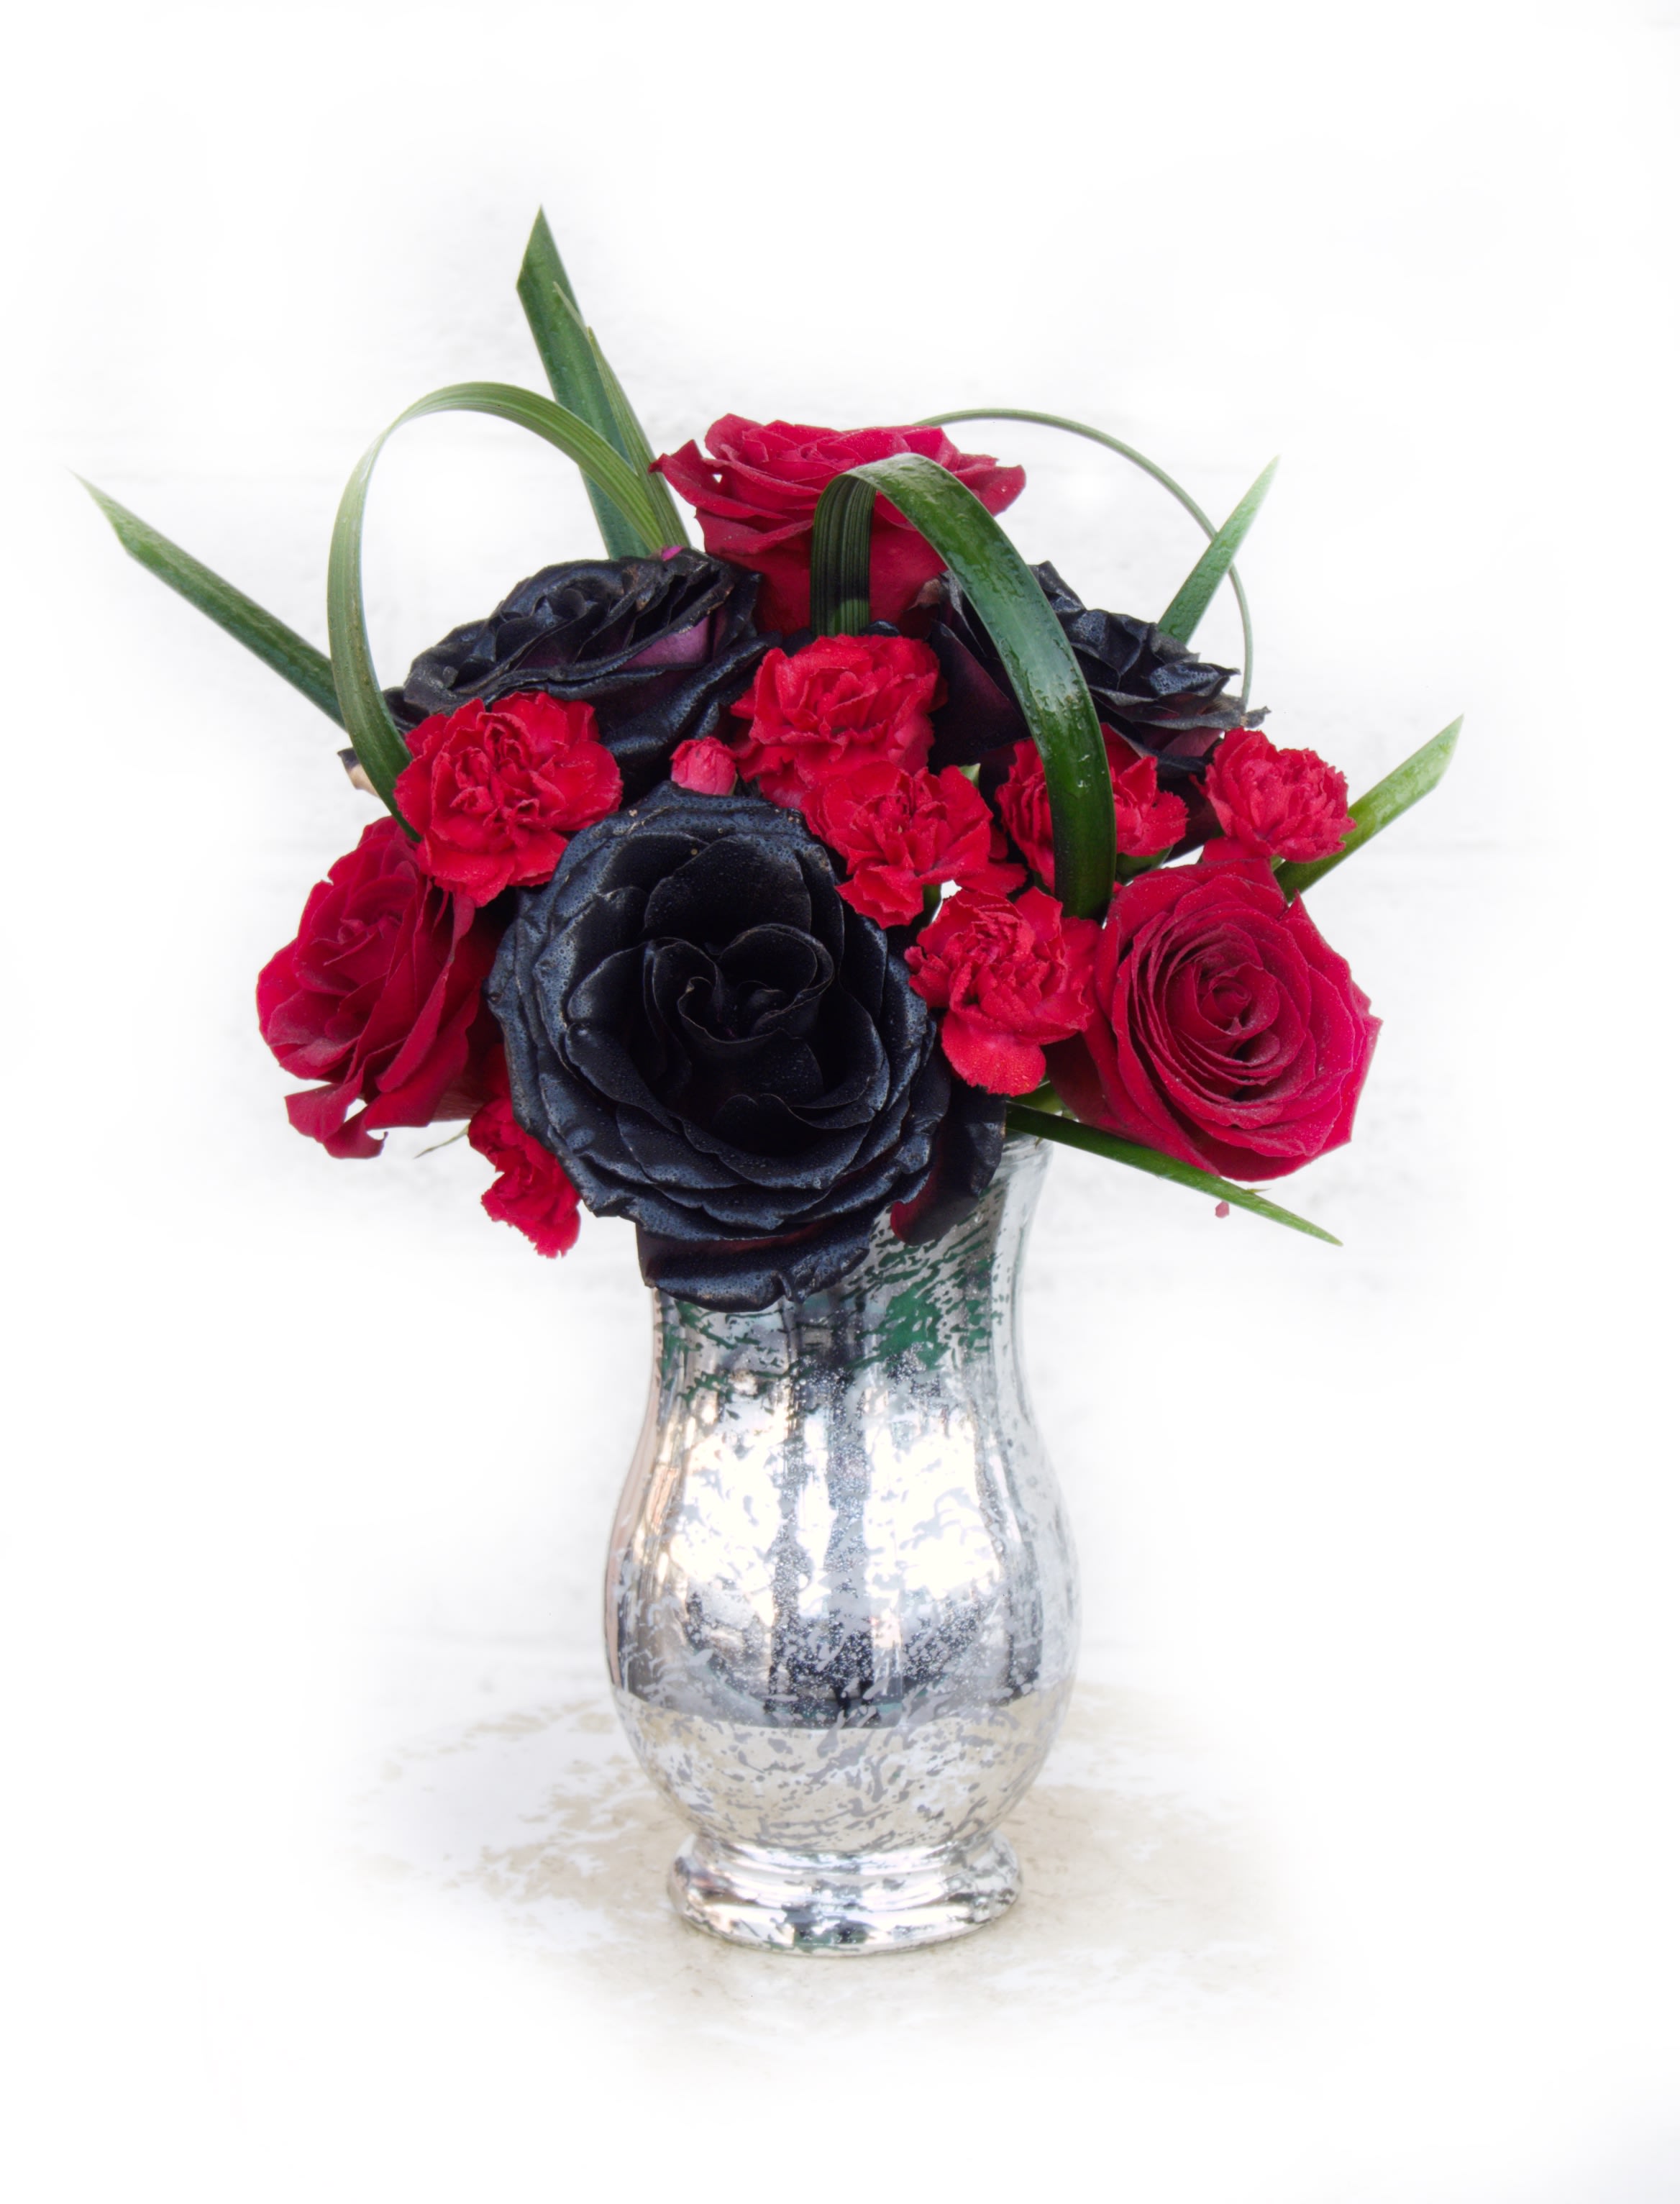 Dare To Love - Classy black and red, this design includes Ecuadorian roses and accents in a silver vase. STANDARD: 3 BLACK ROSES + 3 RED ROSES DELUXE: 6 BLACK ROSES+ 6 RED ROSES PREMIUM: 12 BLACK ROSES: 12 RED ROSES